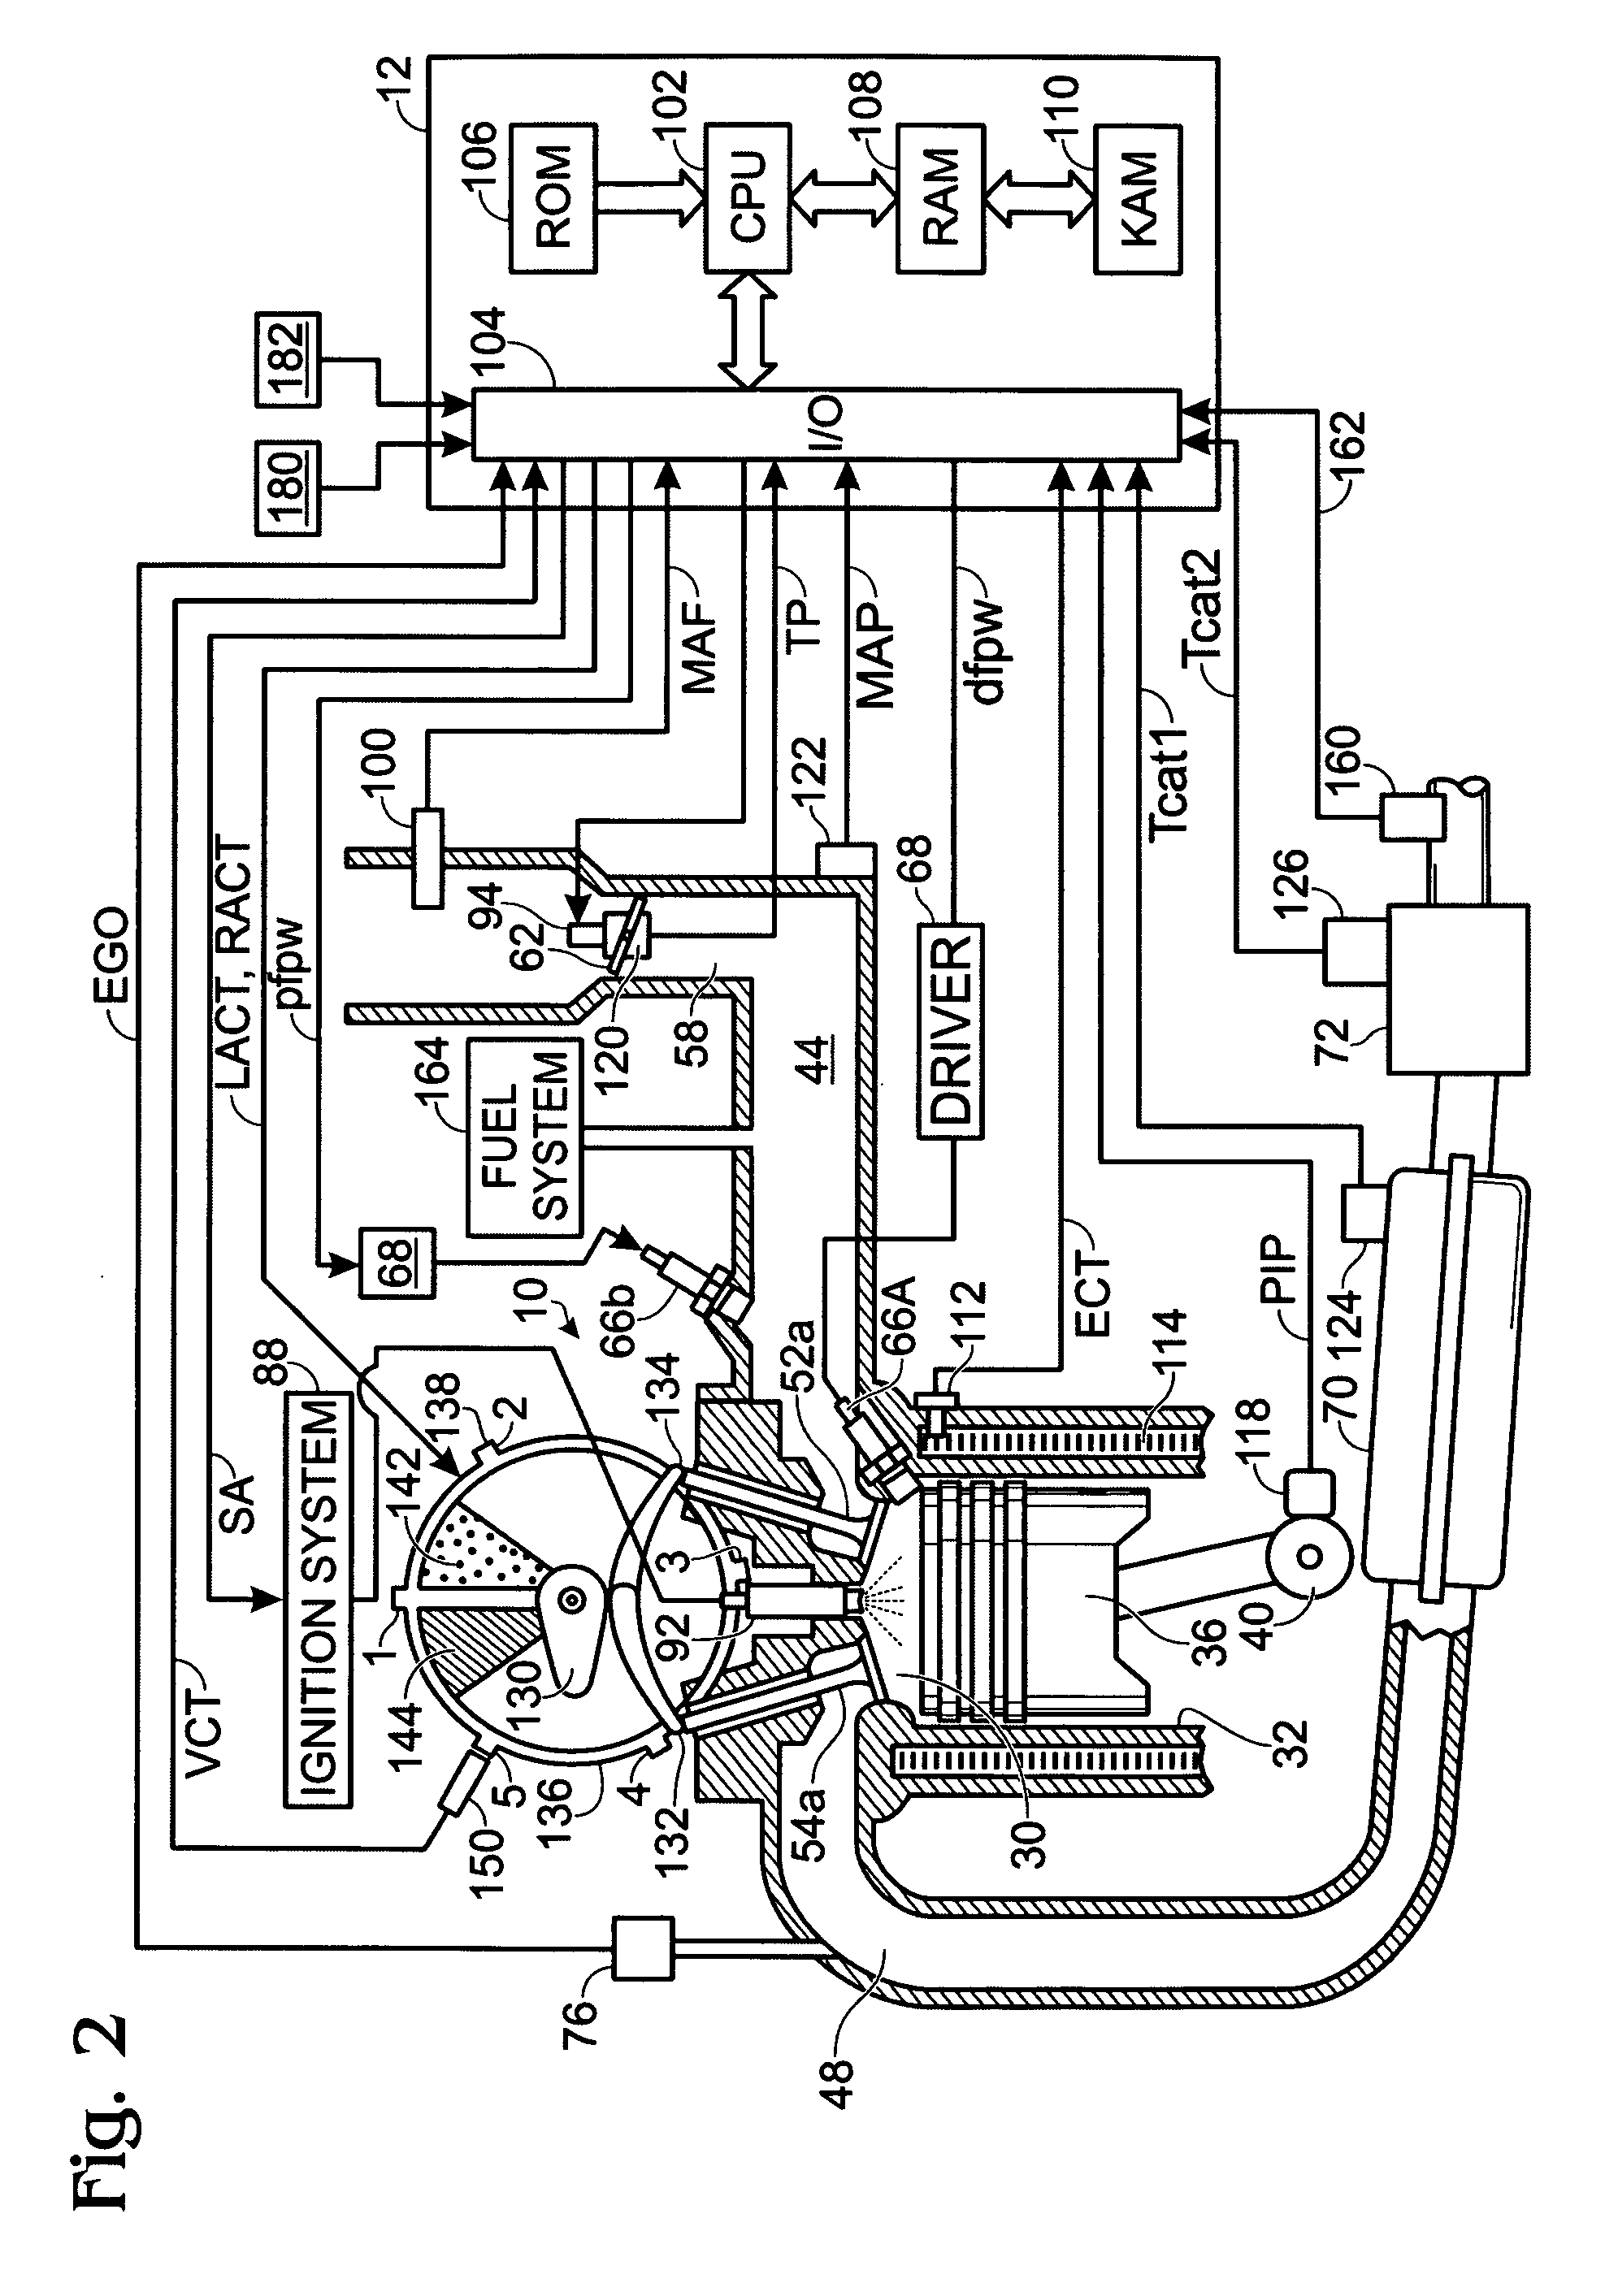 System and method for engine with fuel vapor purging